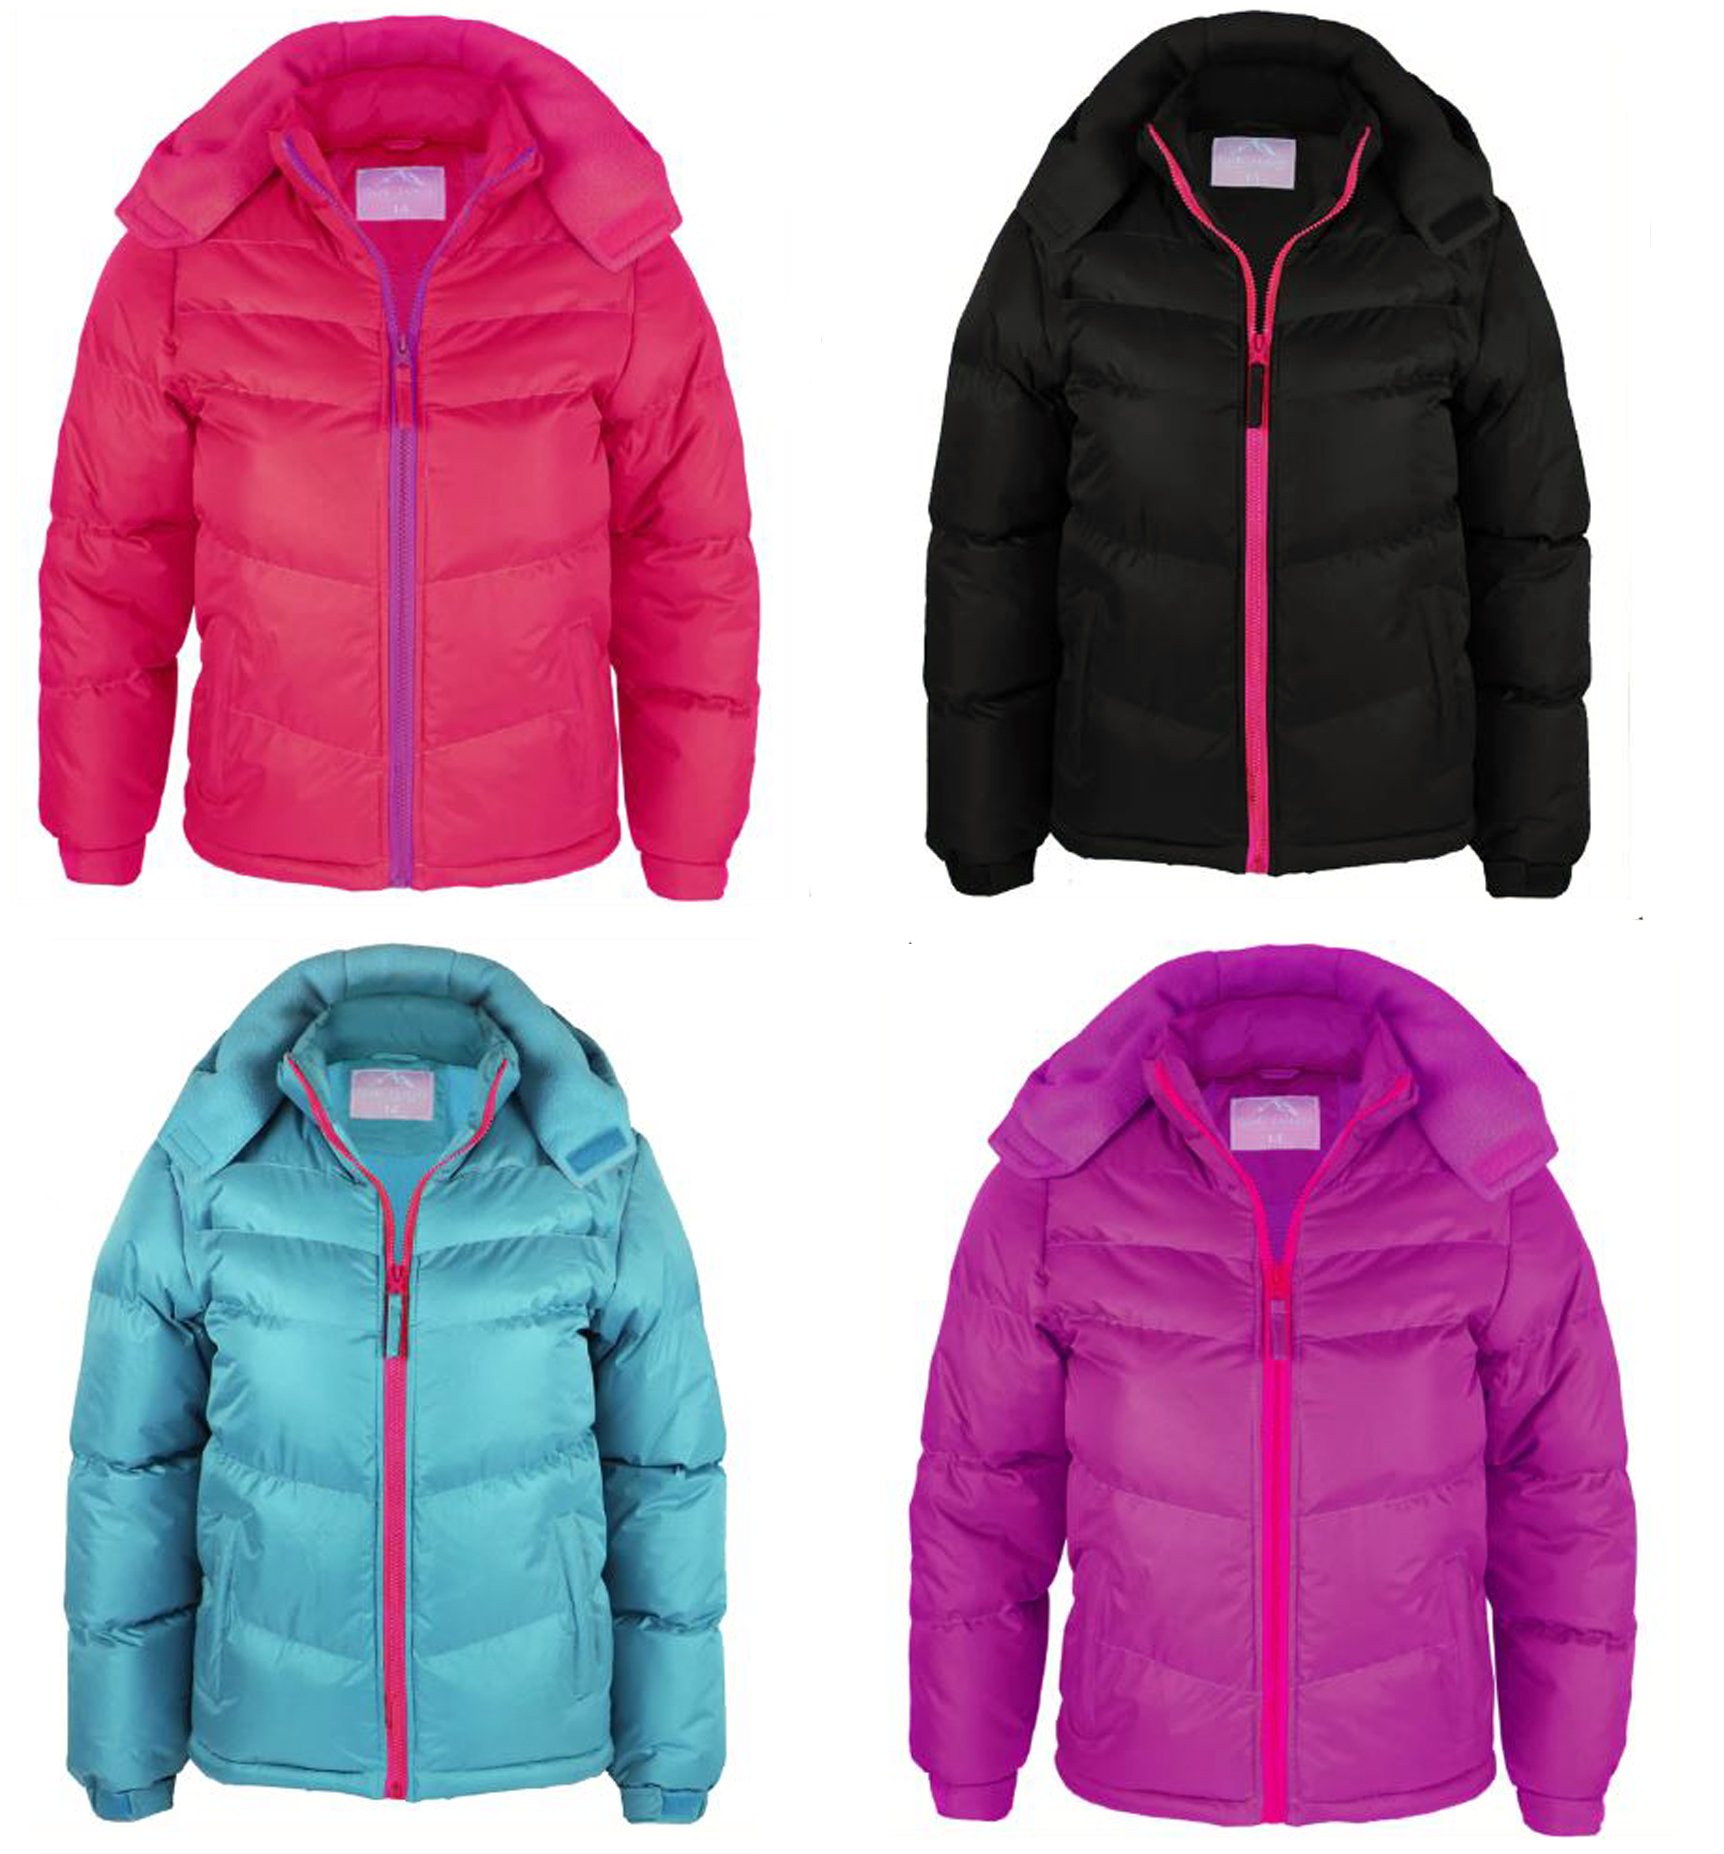 Girl's Insulated Fleece Lined Puff JACKETs w/ Detachable Hood - Sizes 8-16 - Choose Your Color(s)